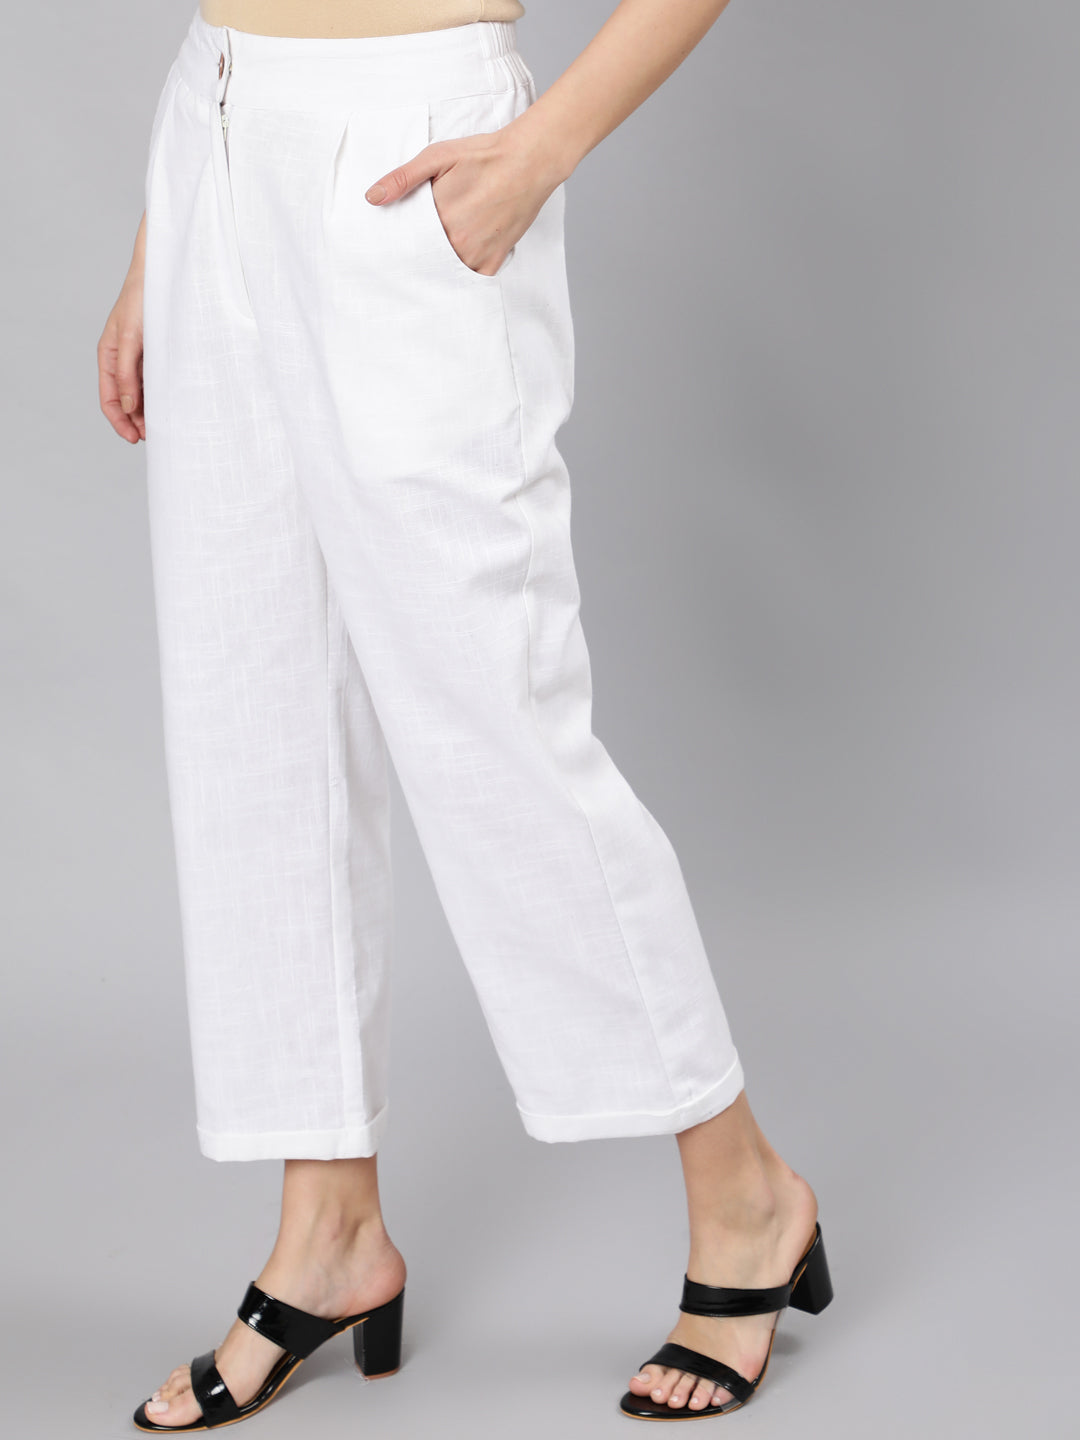 Buy Casual Cotton Pants For Women